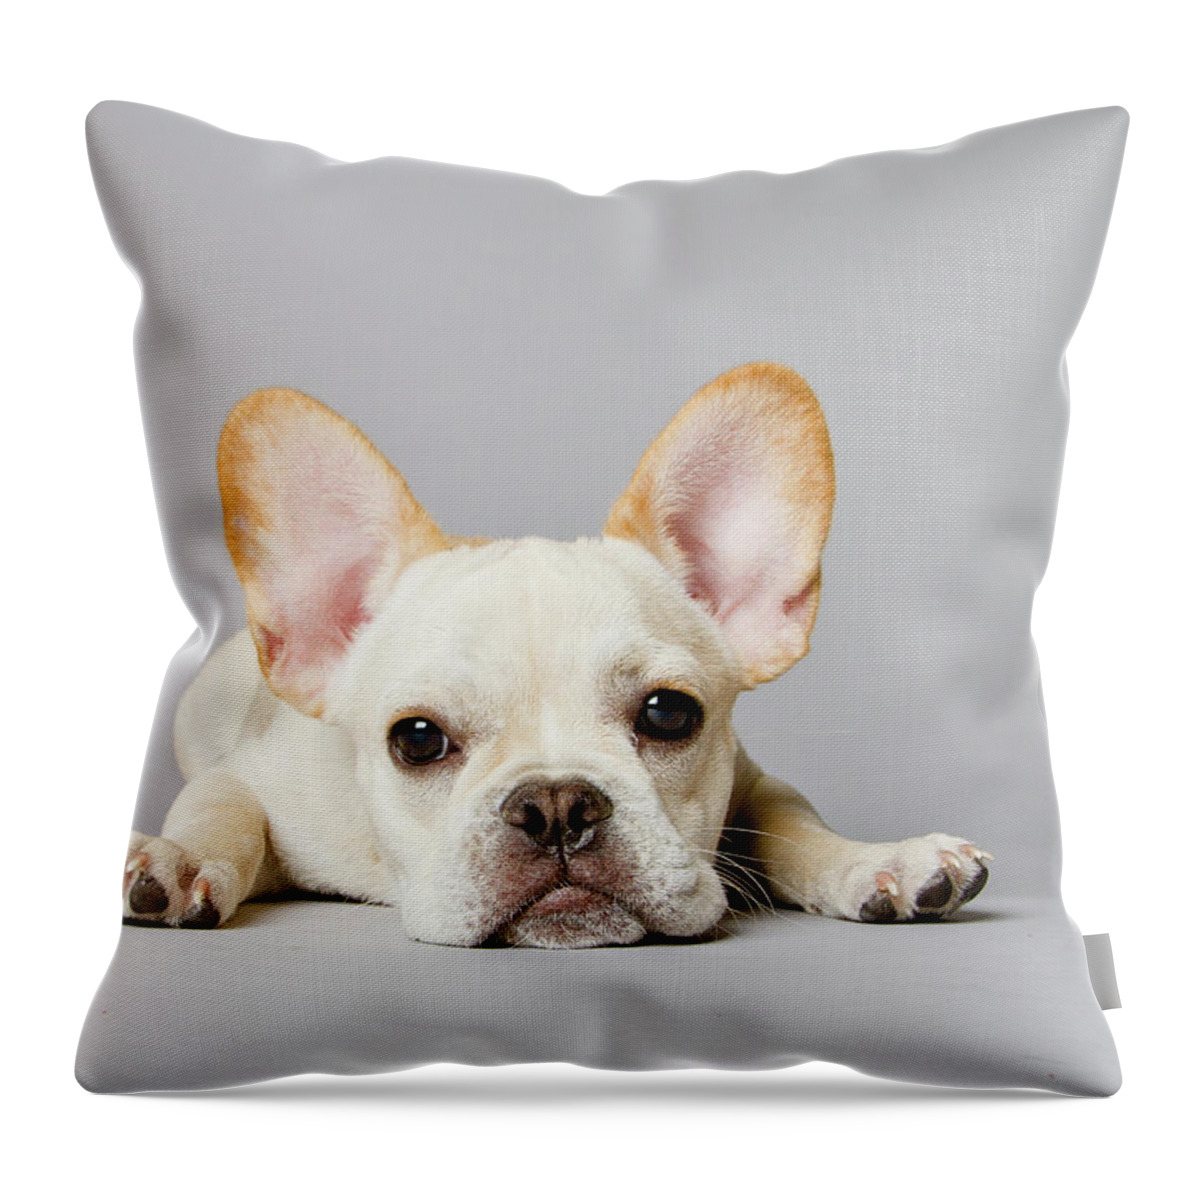 Pets Throw Pillow featuring the photograph French Bulldog by Square Dog Photography